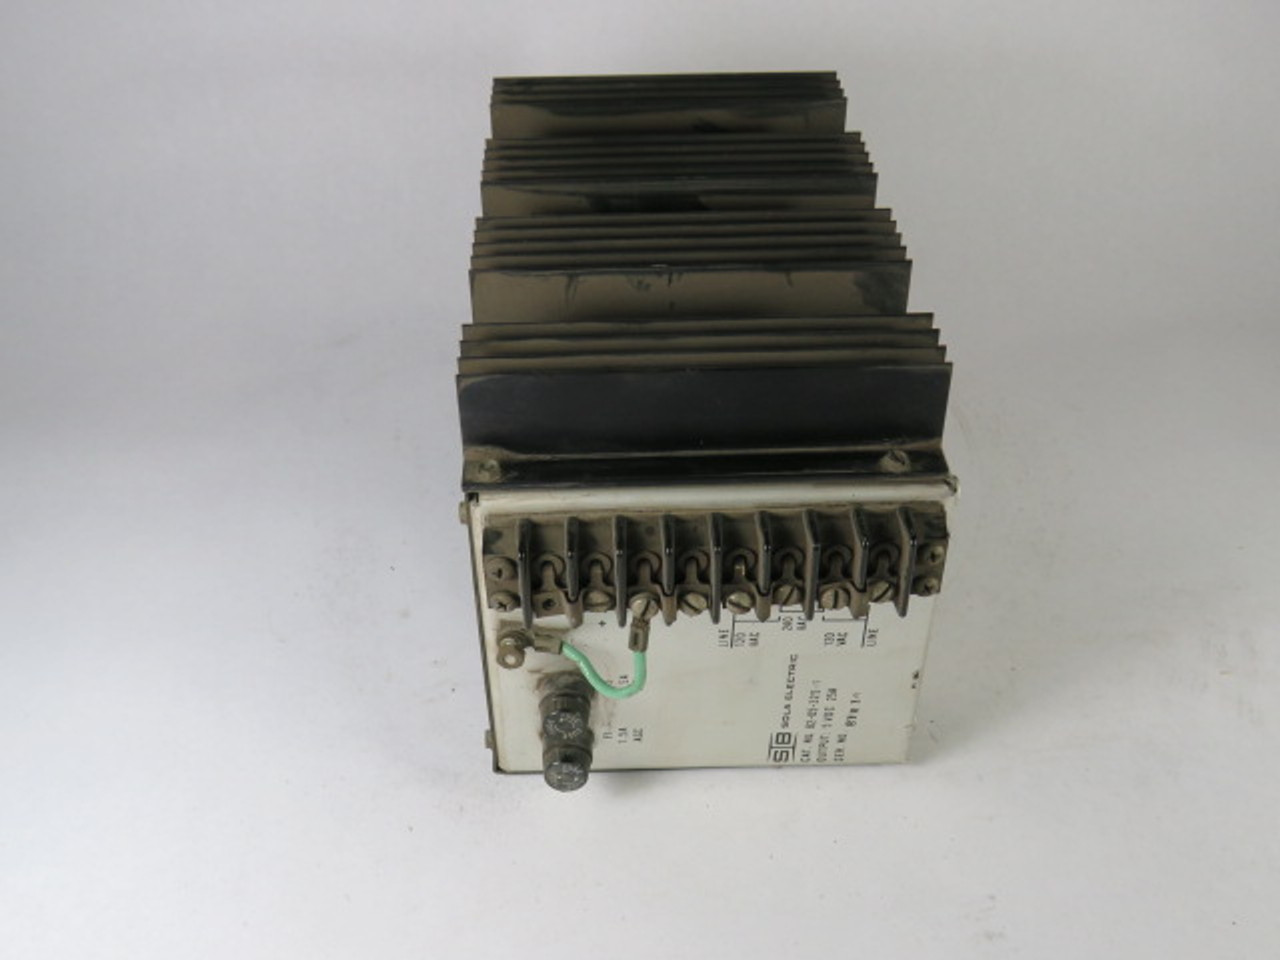 Sola 82-05-325-1 DC Power Supply 120/240VAC Input 5VDC Output 25A USED